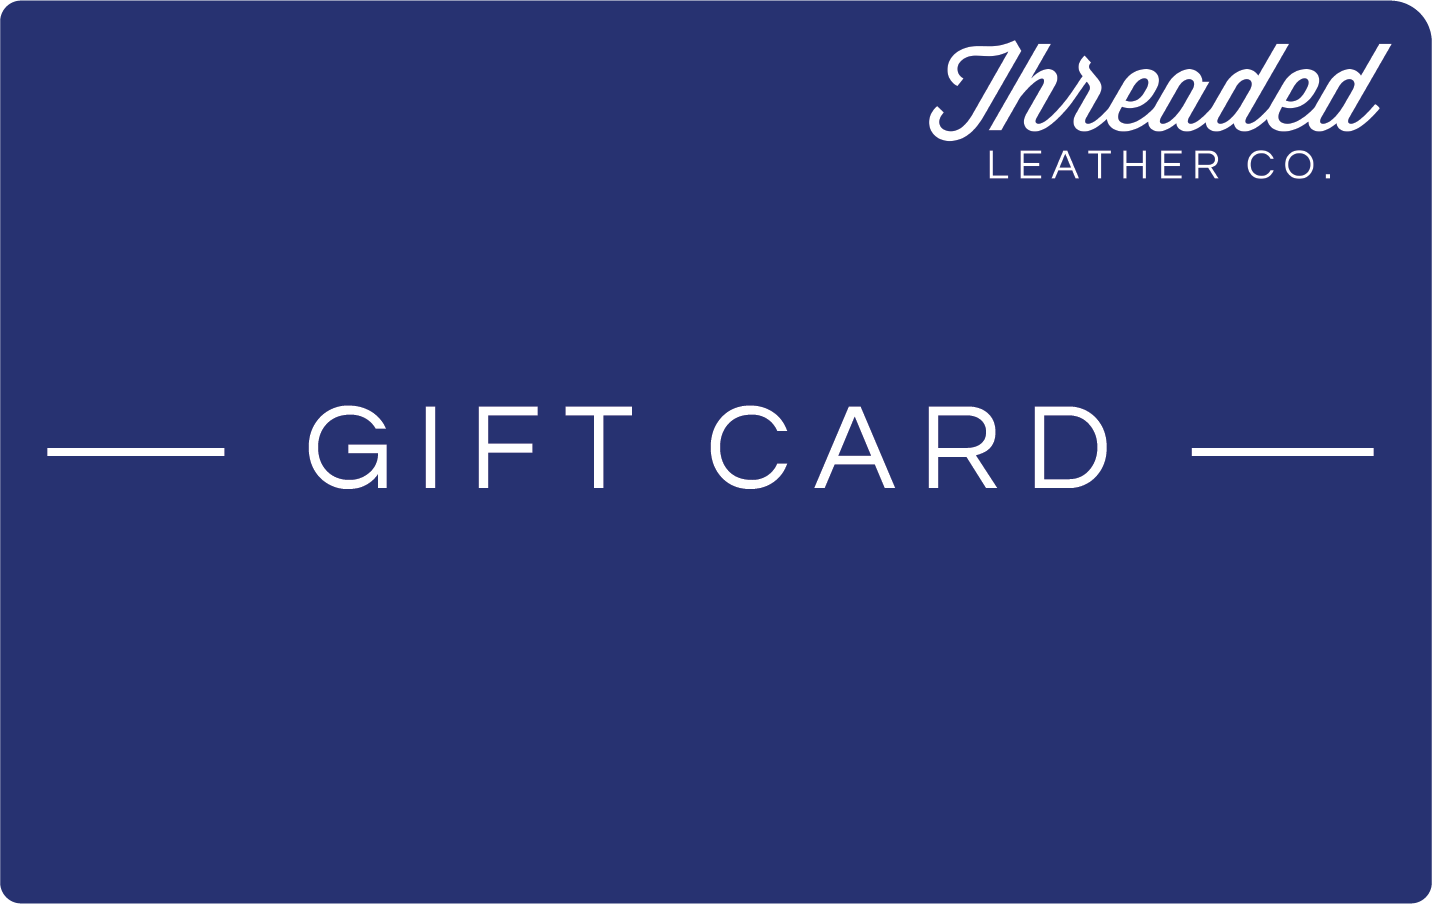 Threaded Leather Co. Gift Card